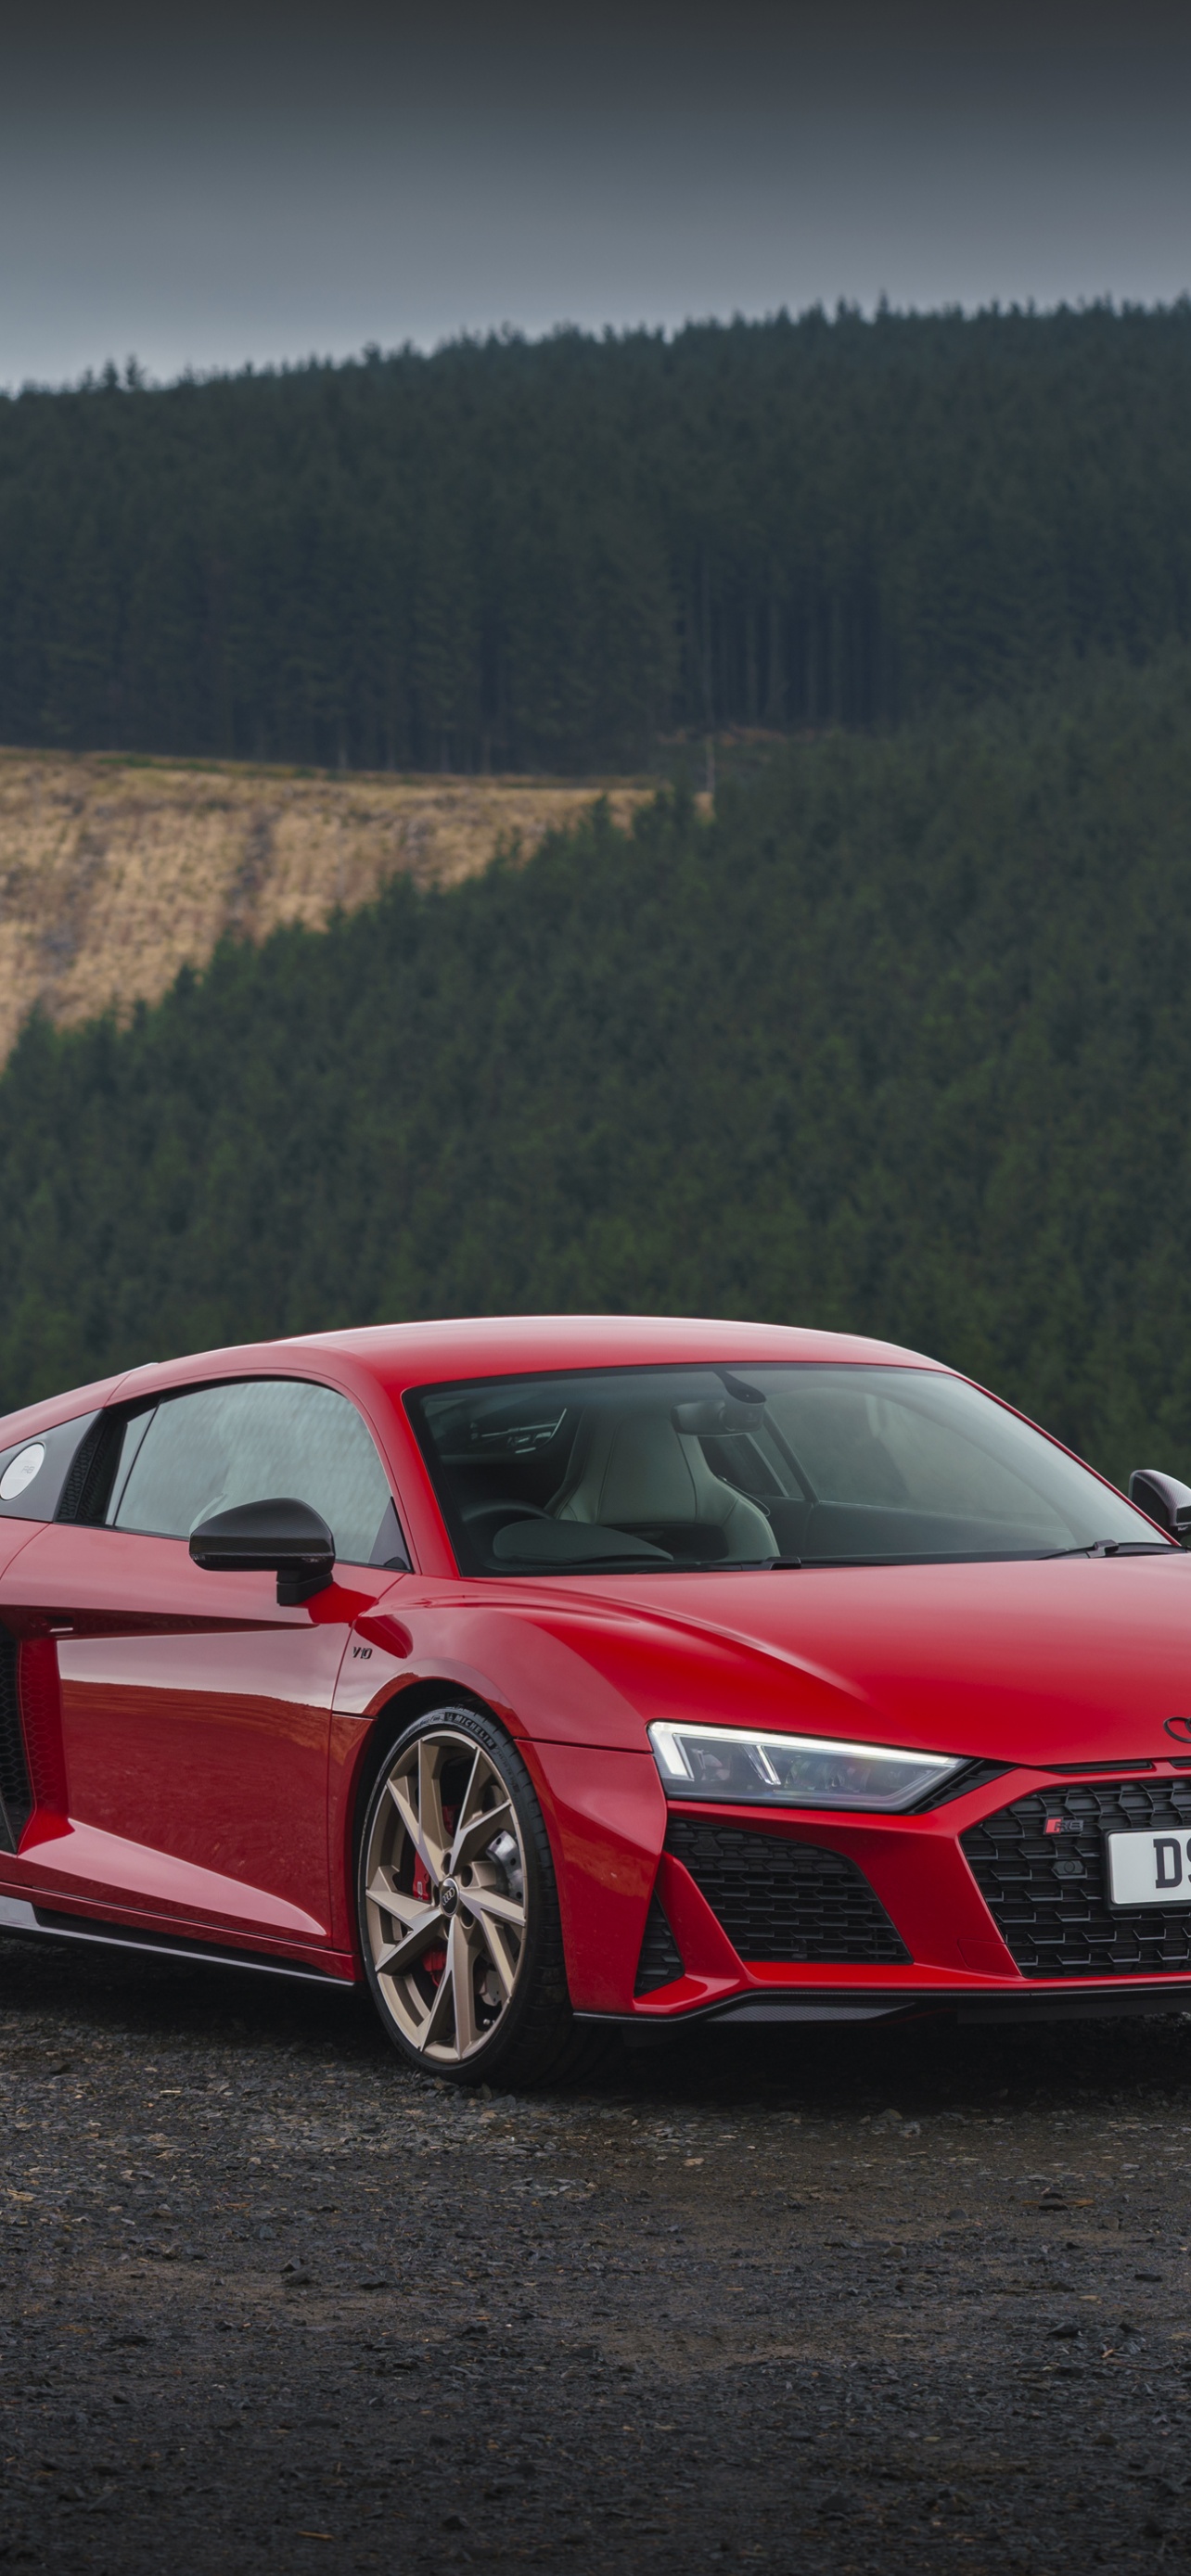 Cool Audi R8 Concept Car iPhone Wallpapers Free Download